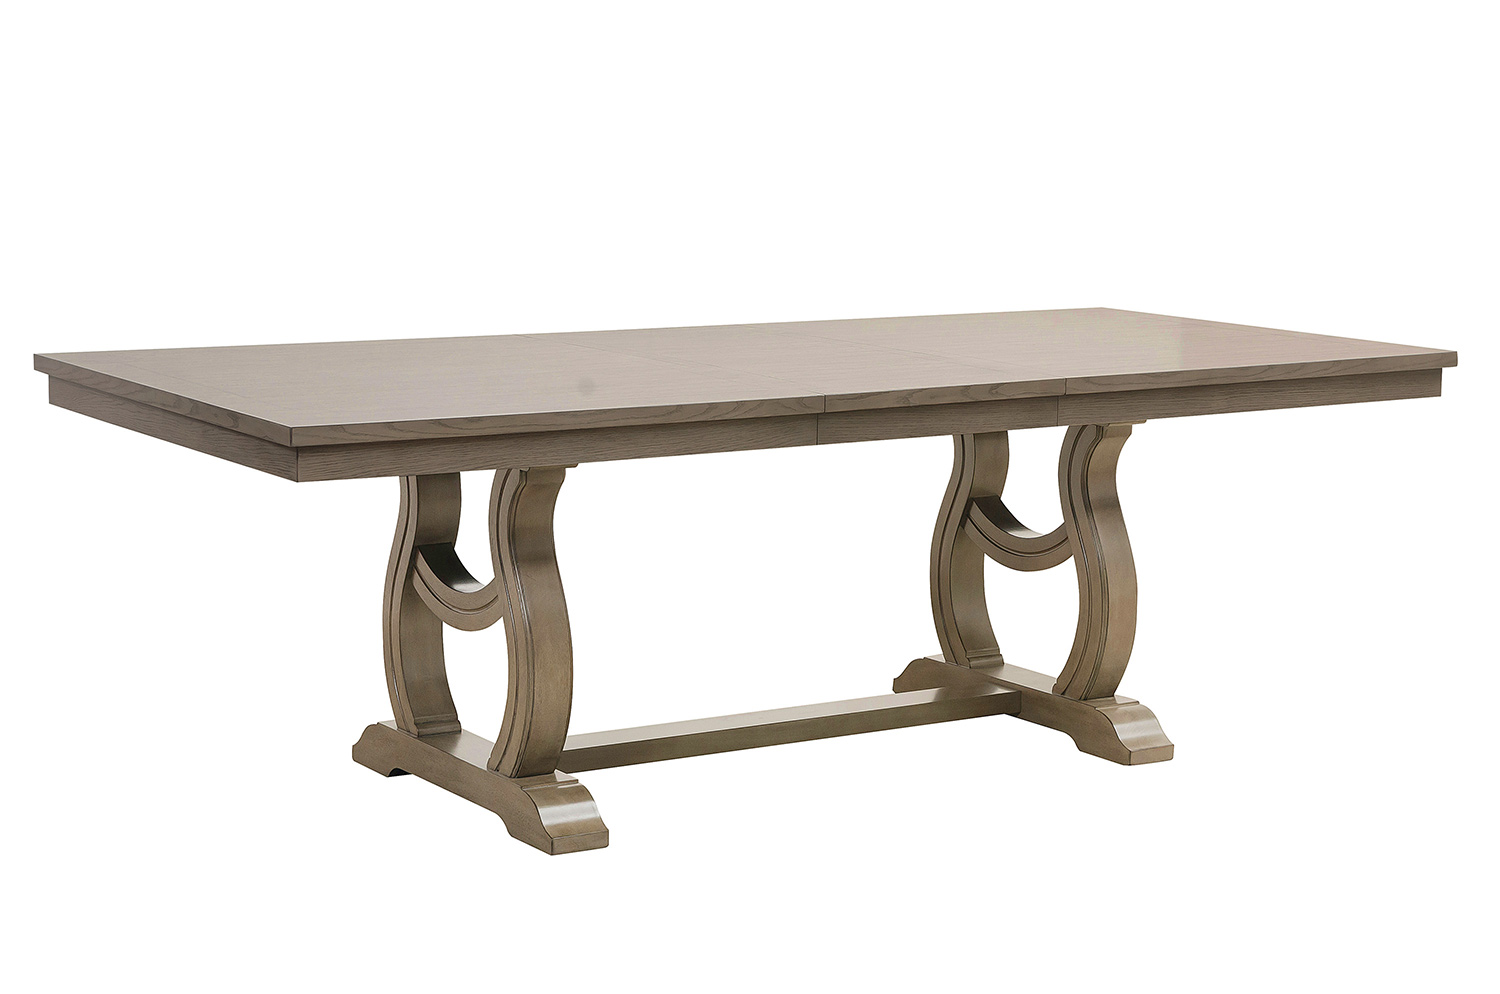 Homelegance Vermillion Dining Table - Bisque